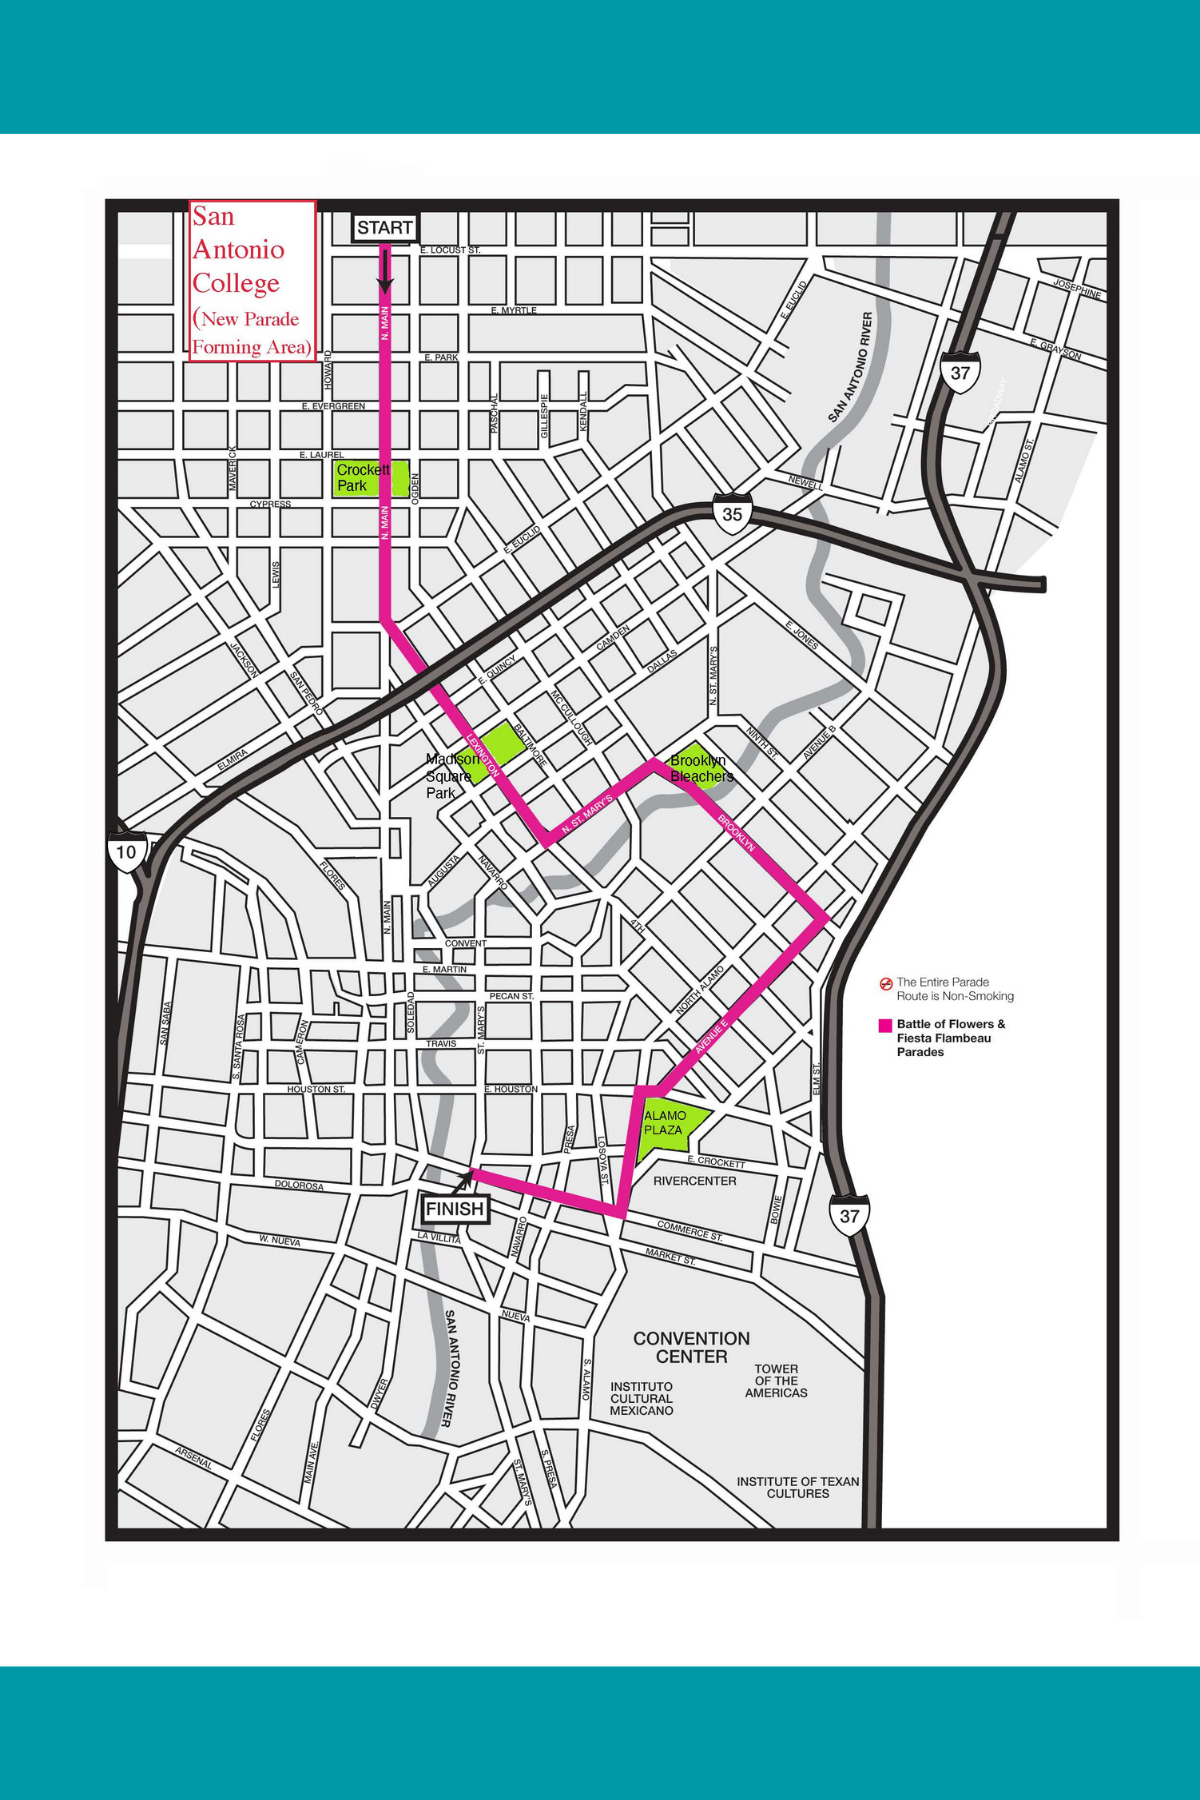 Fiesta® Commission announces new 2022 Parade Route for Battle of Flowers® and Fiesta Flambeau® Parades